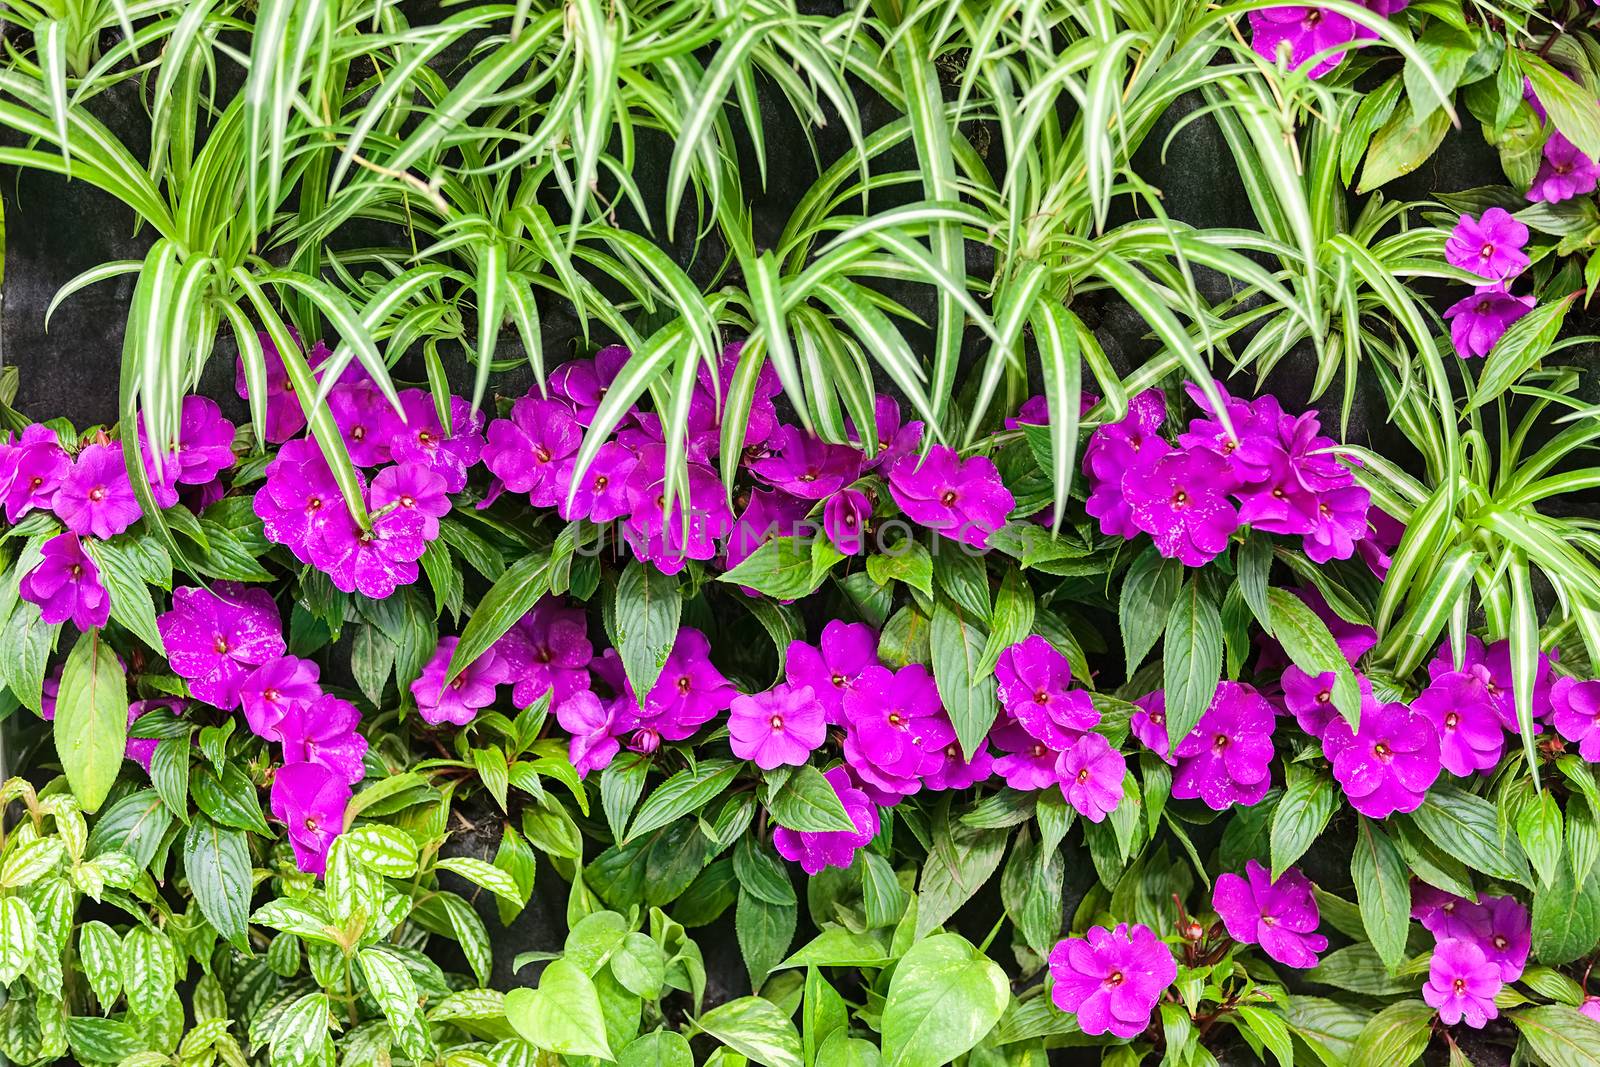  purple flowers with green leaves, note shallow depth of field